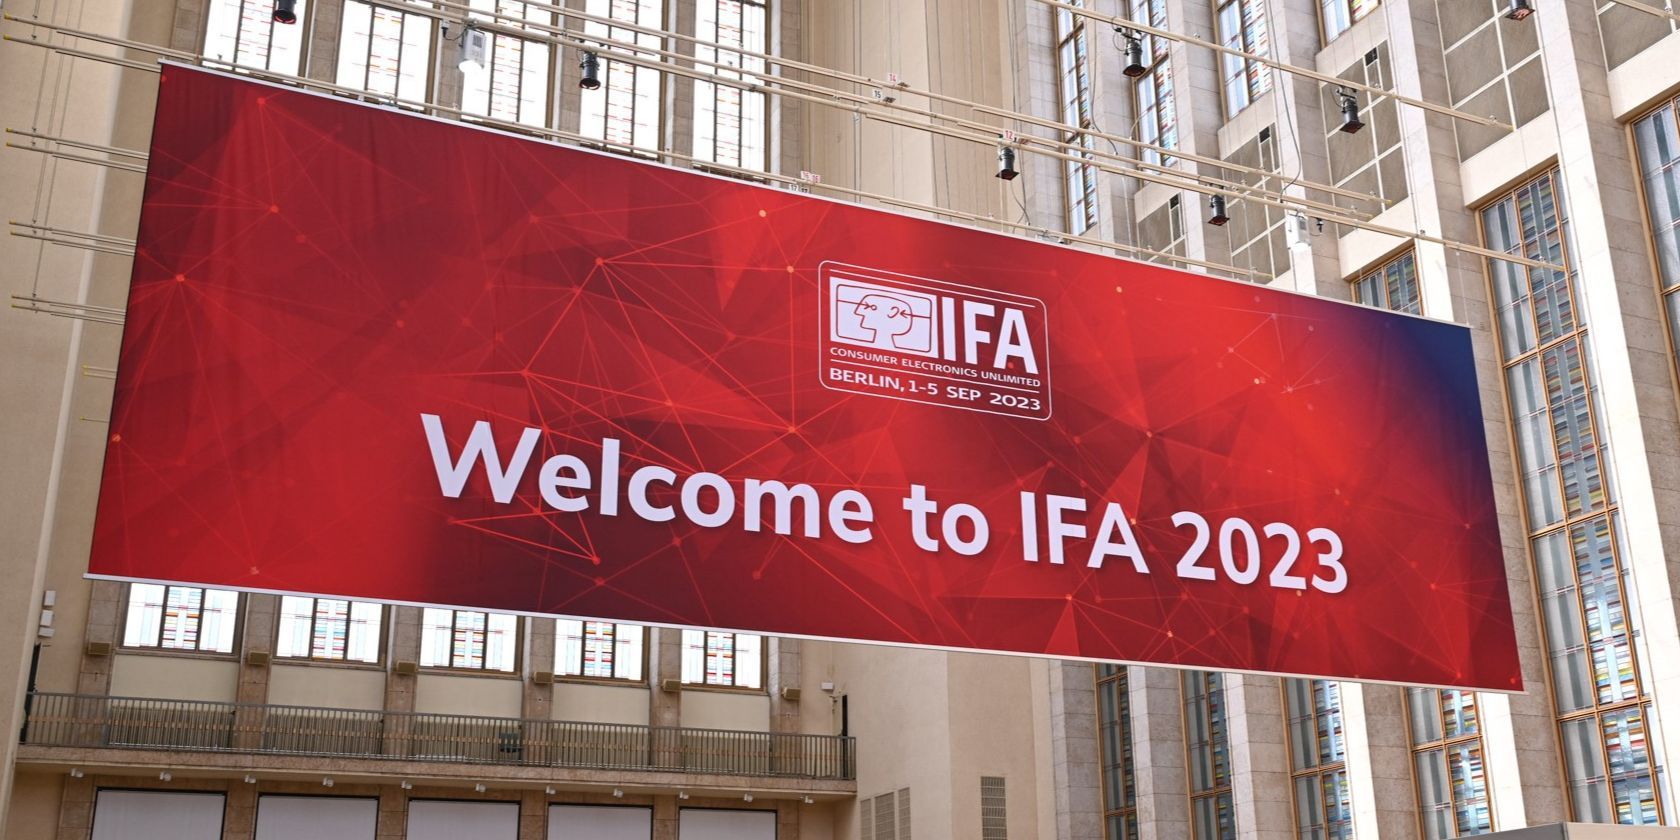 IFA 2023 welcome banner